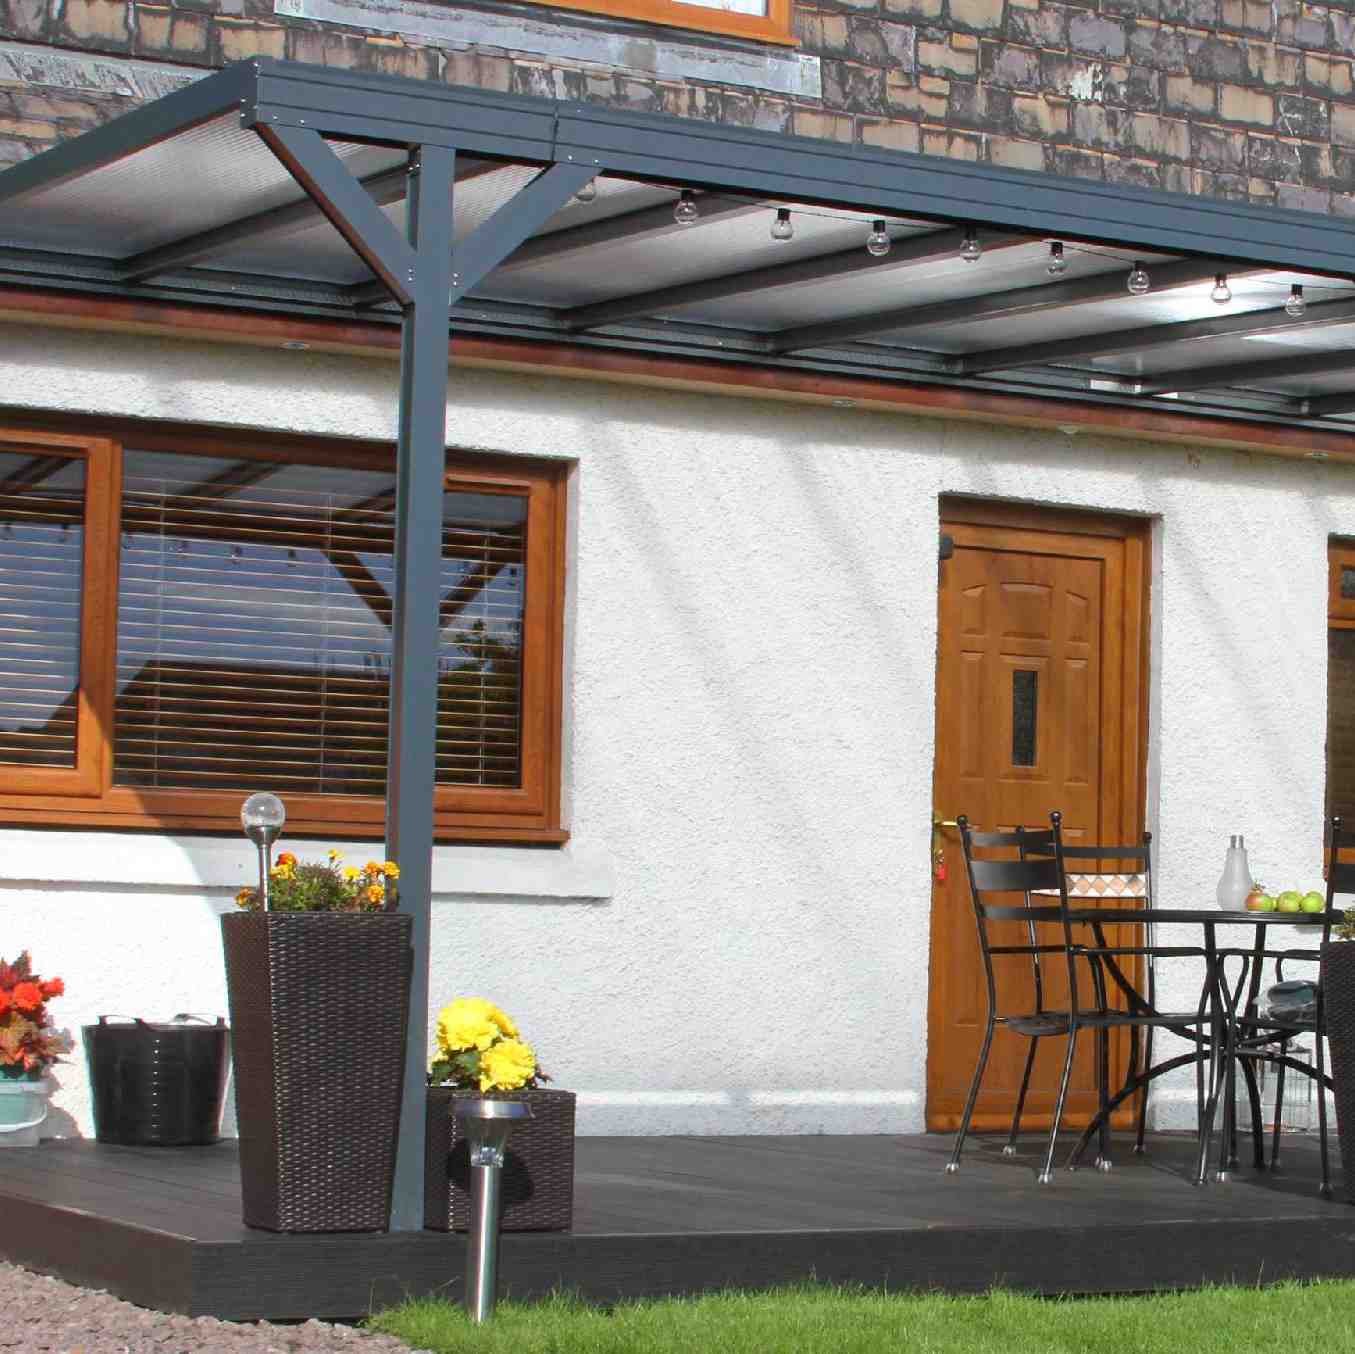 Omega Verandah, Anthracite Grey, 6mm Glass Clear Plate Polycarbonate Glazing - 7.7m (W) x 3.5m (P), (4) Supporting Posts